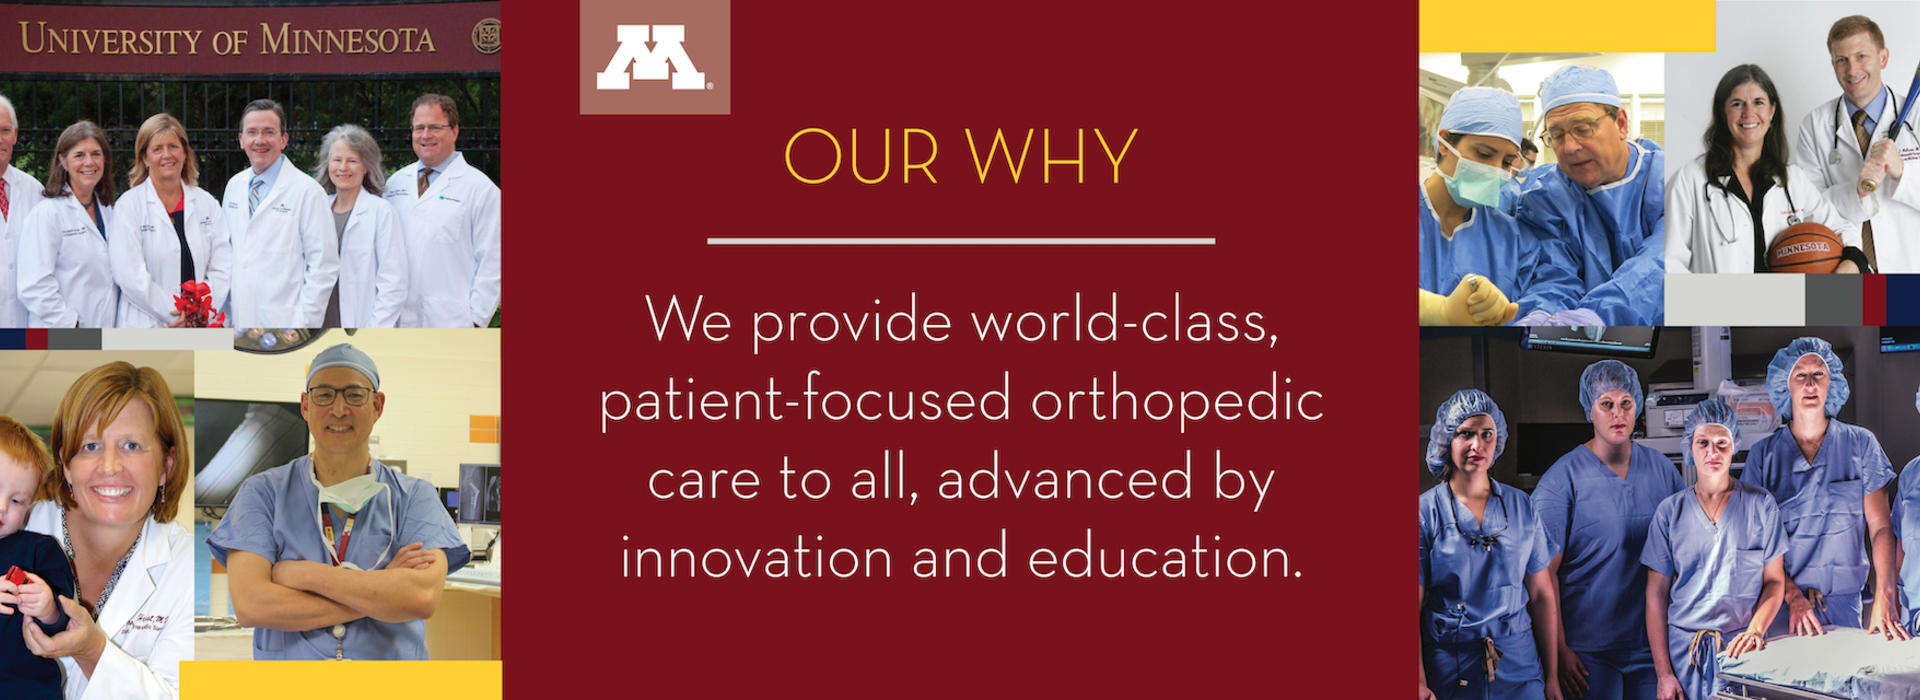 Our Why: We provide world-class, patient-focused orthopedic care to all, advanced by innovation and education.